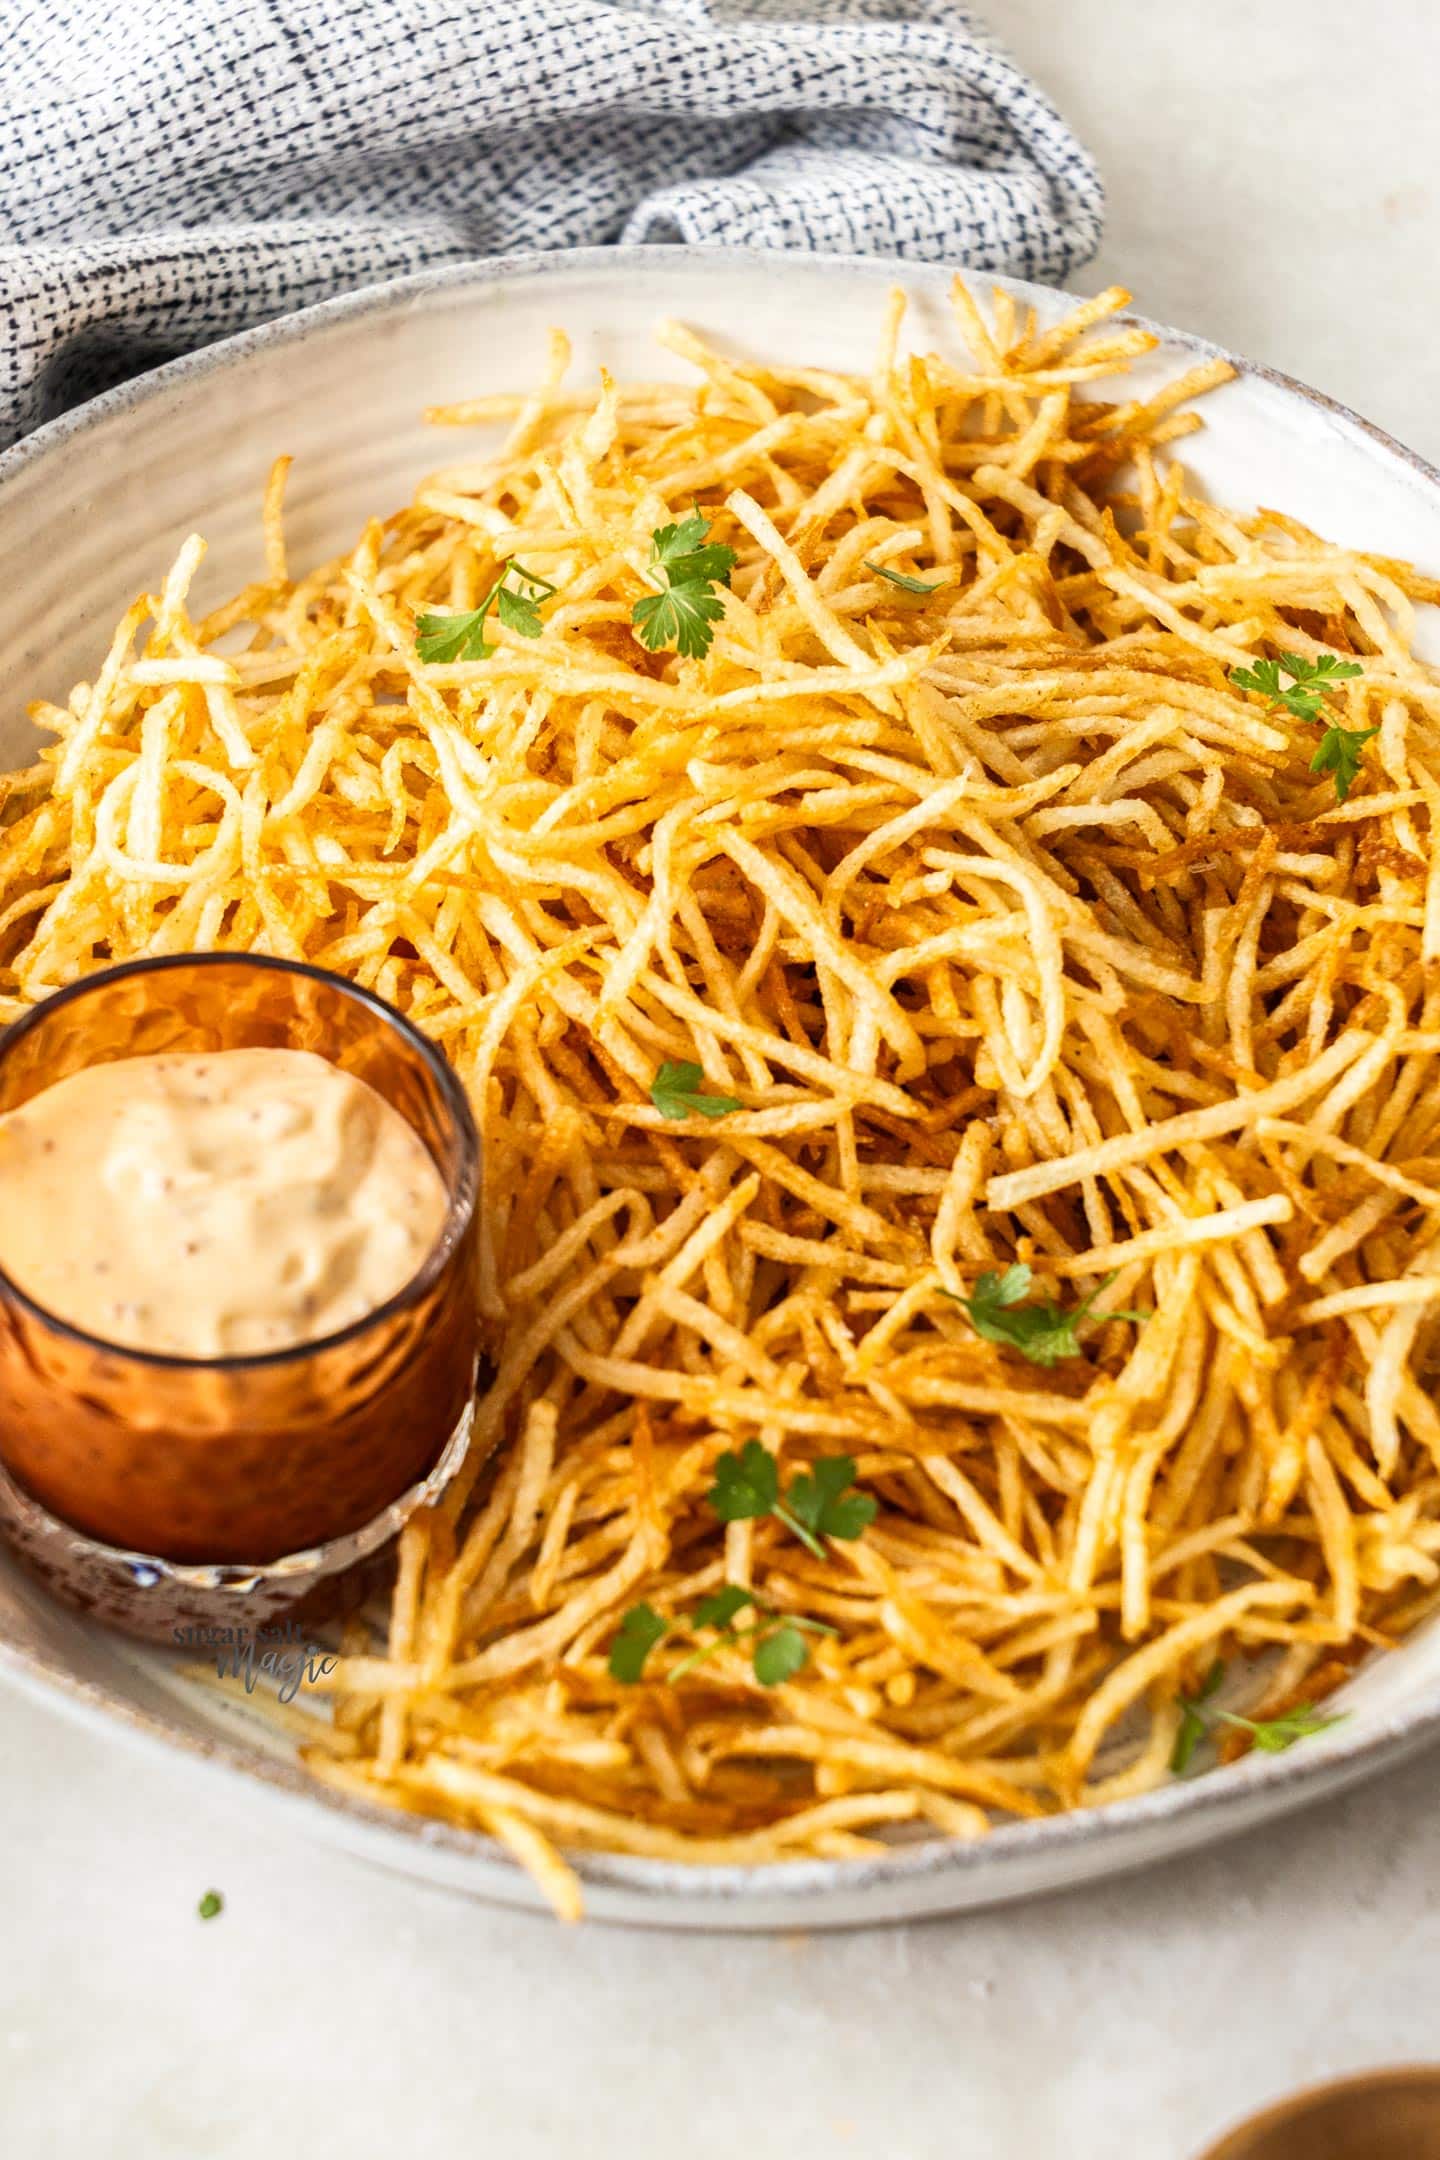 A bowl of shoestring fries.